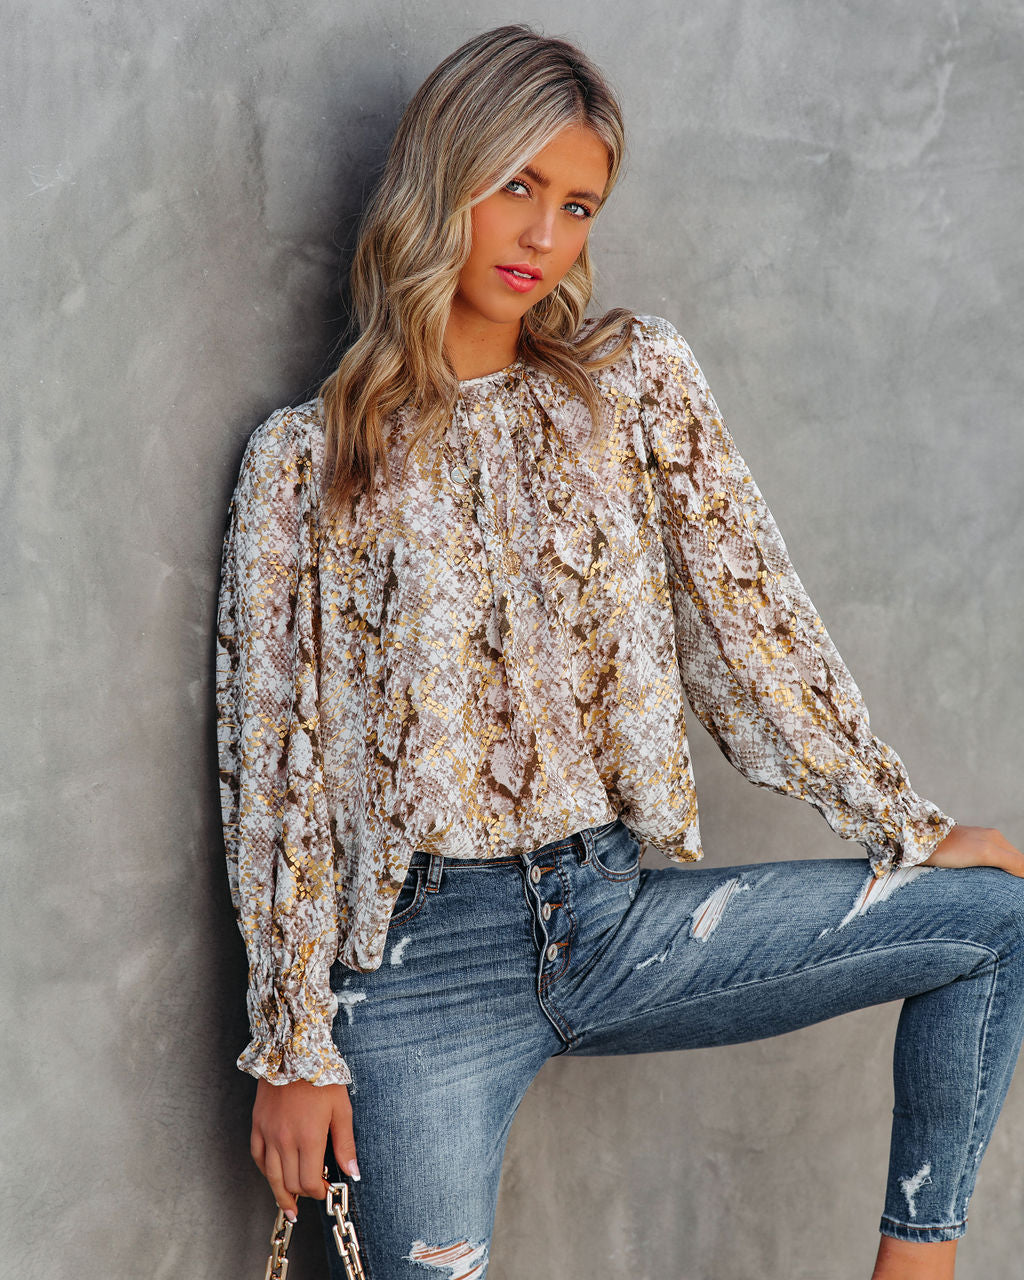 The Golden Days Printed Blouse